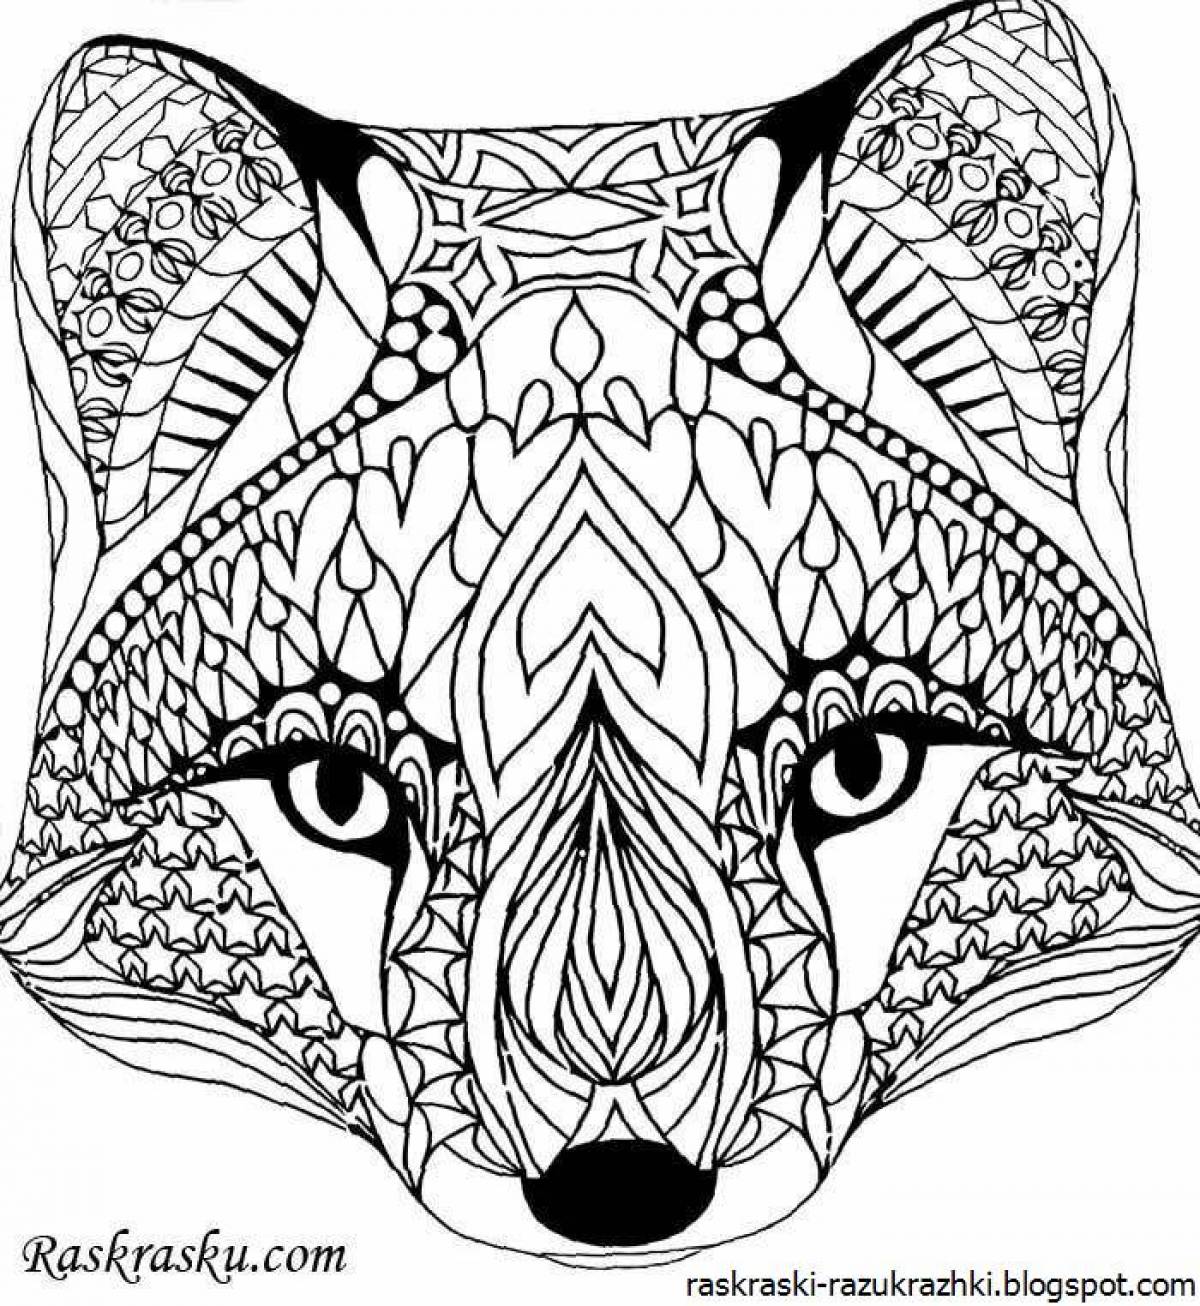 Great complex coloring book